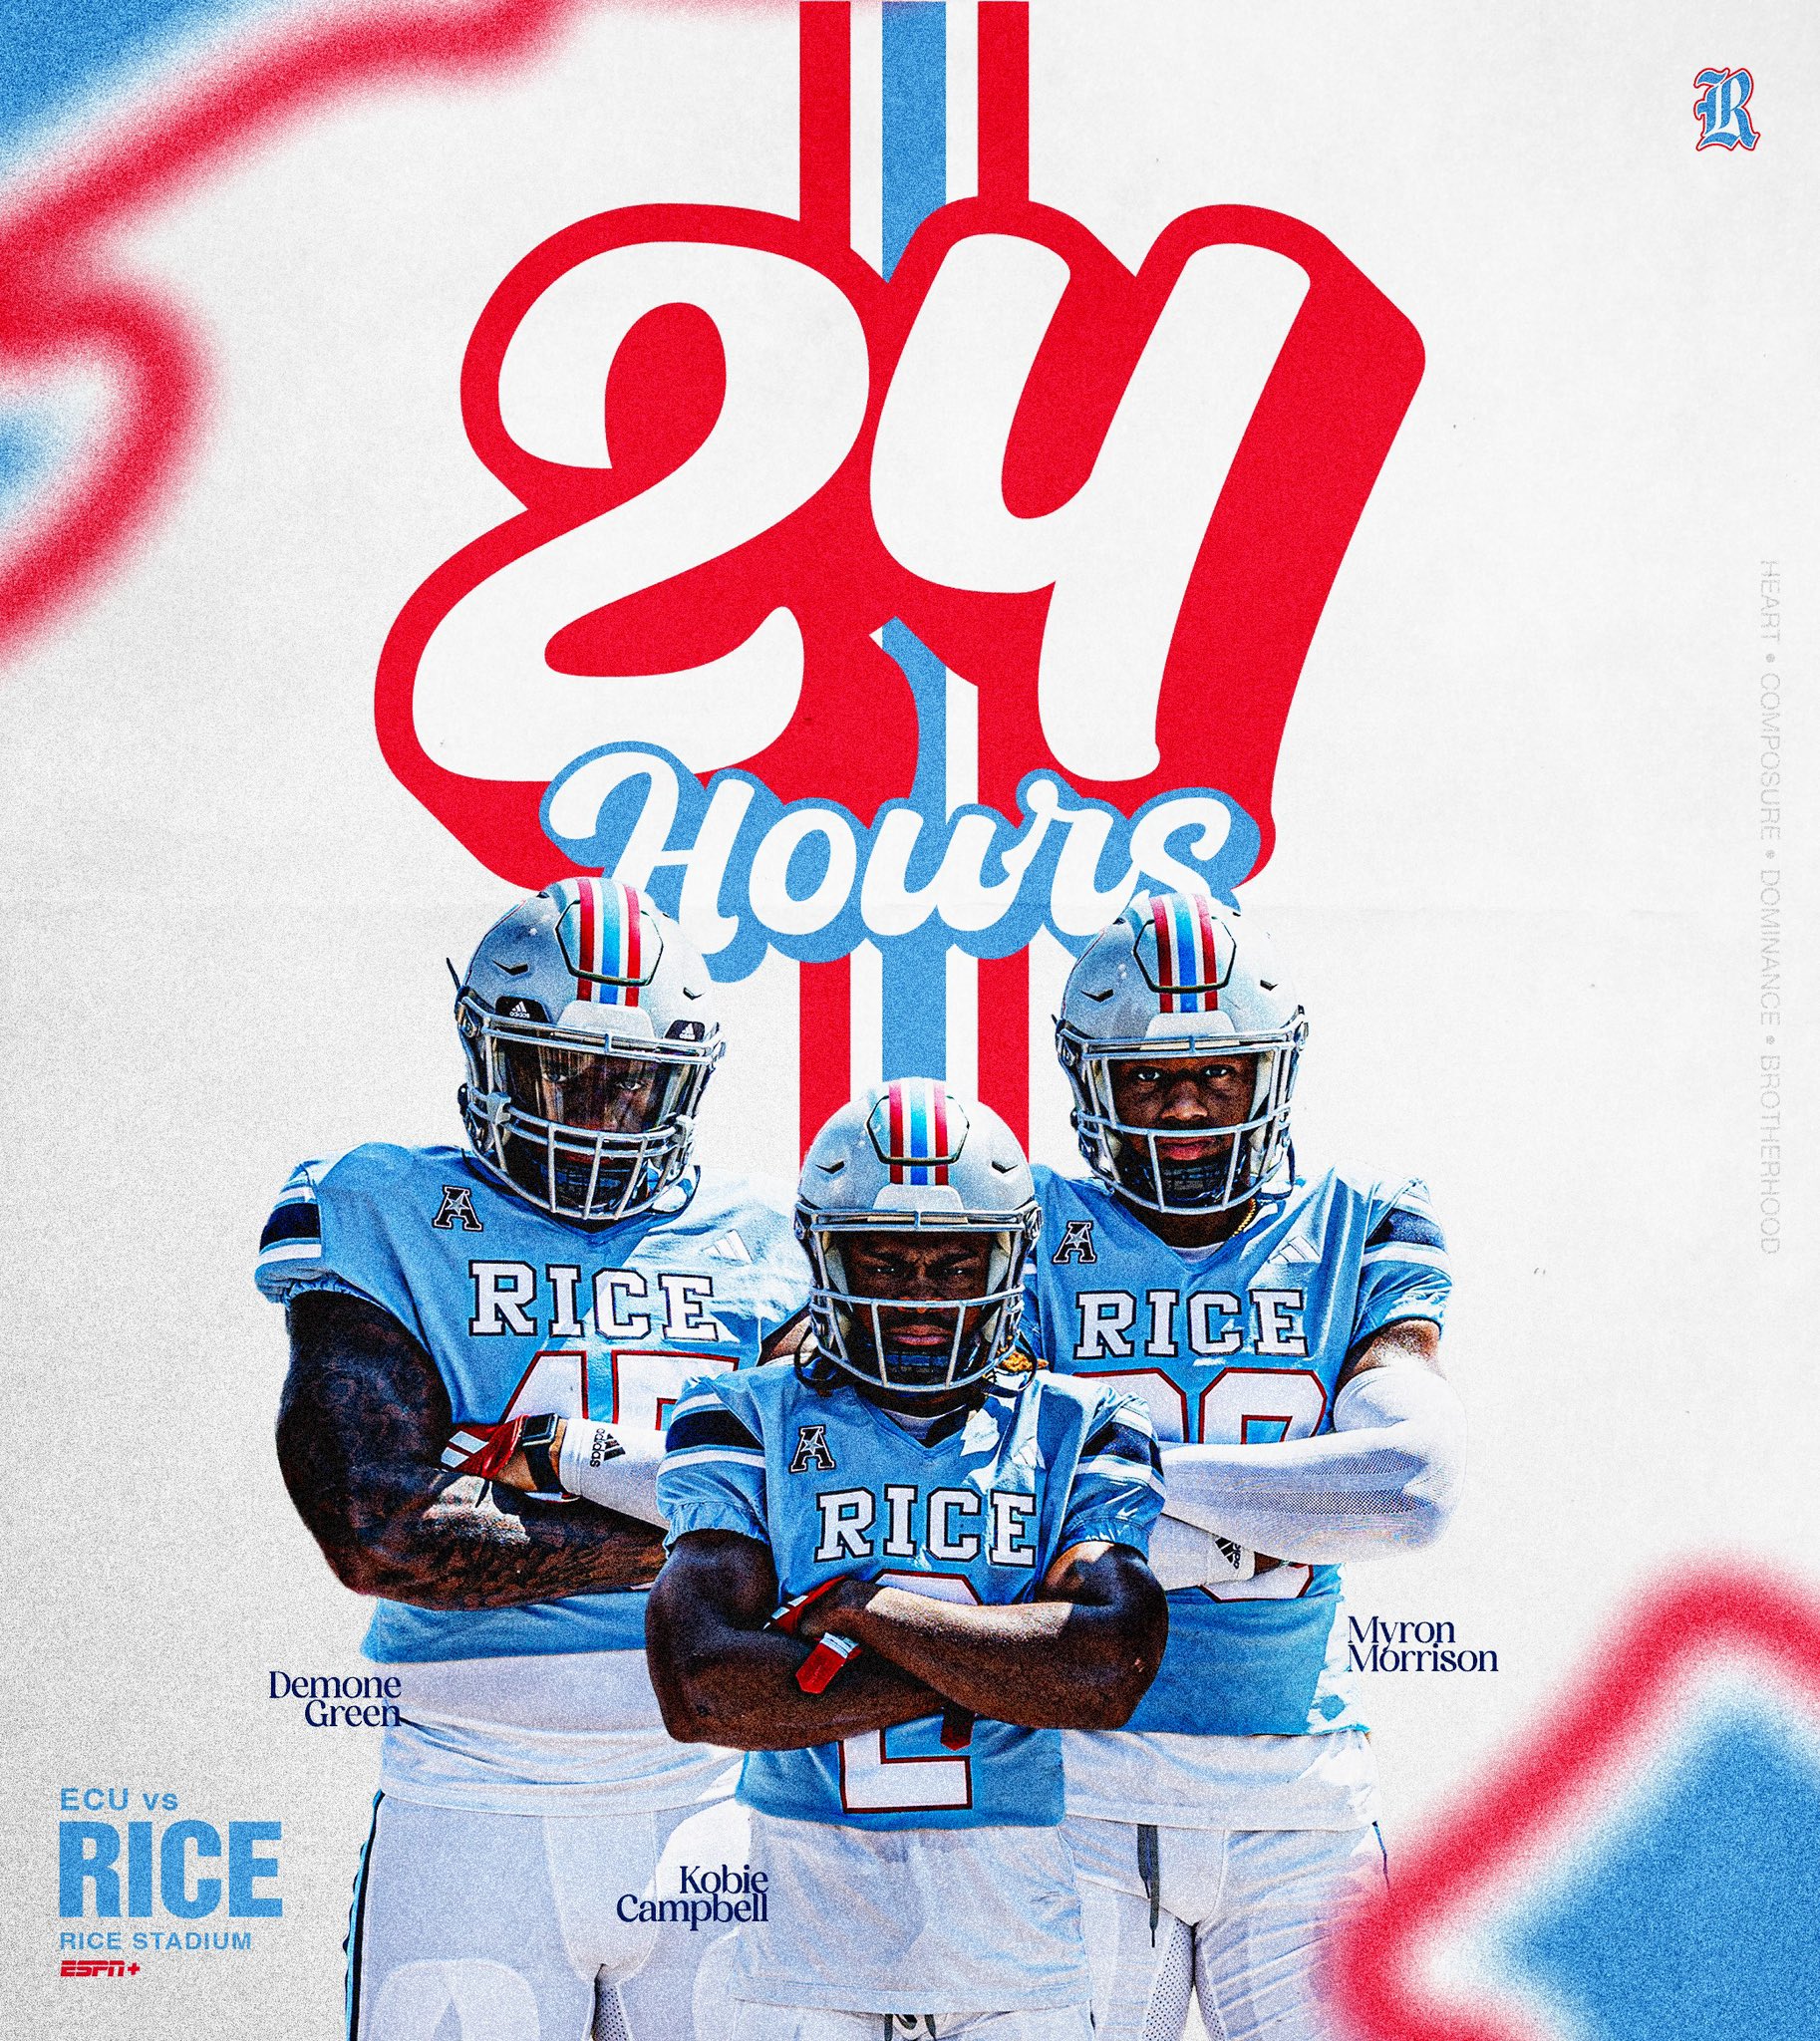 Rice University to sport Houston Oilers-inspired uniforms during